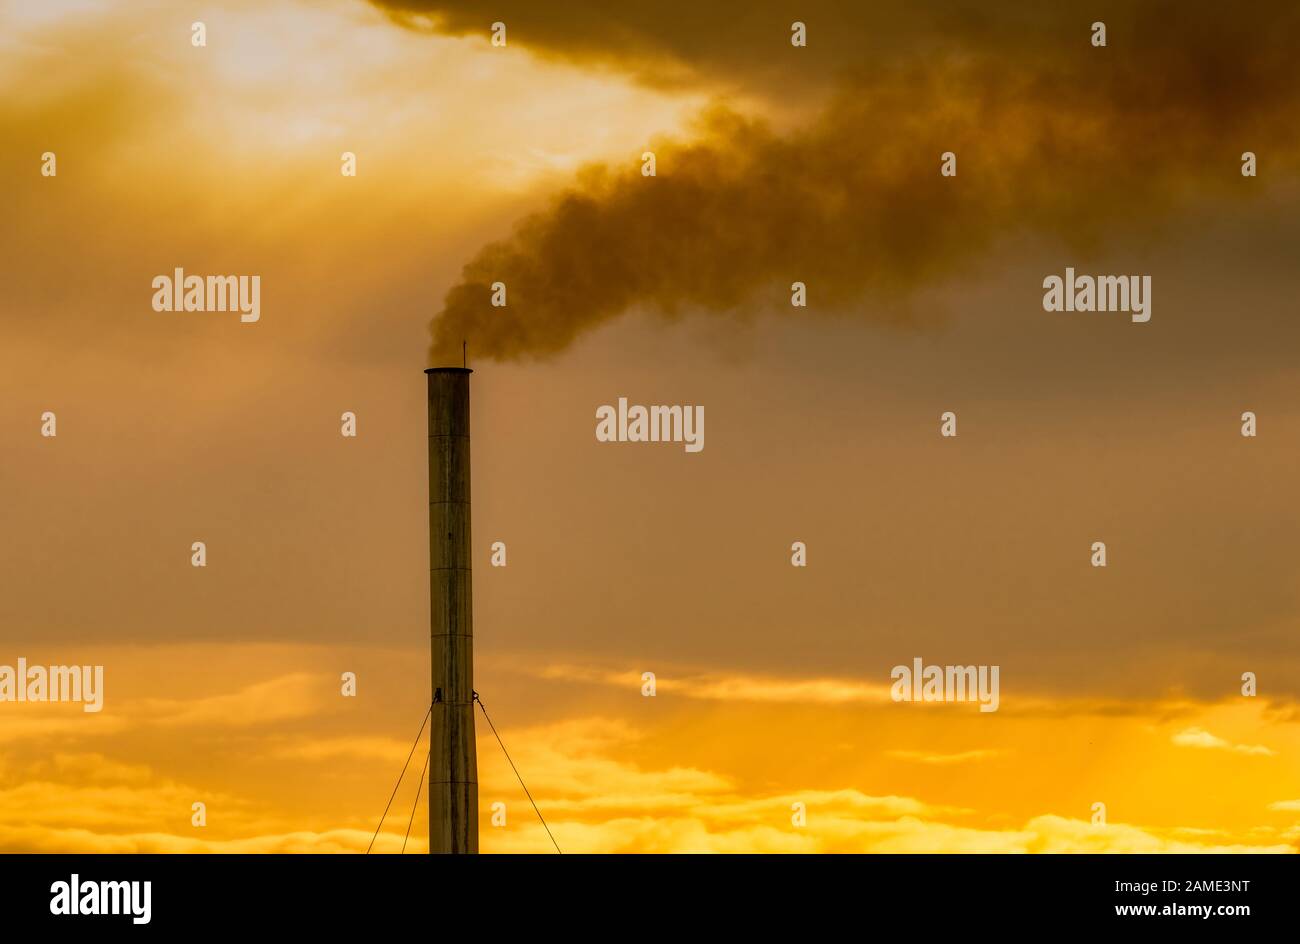 Air pollution from factory. Smoke from chimney of industrial pipe on sunset sky. Global warming problem concept. Bad air quality. Air pollutant Stock Photo